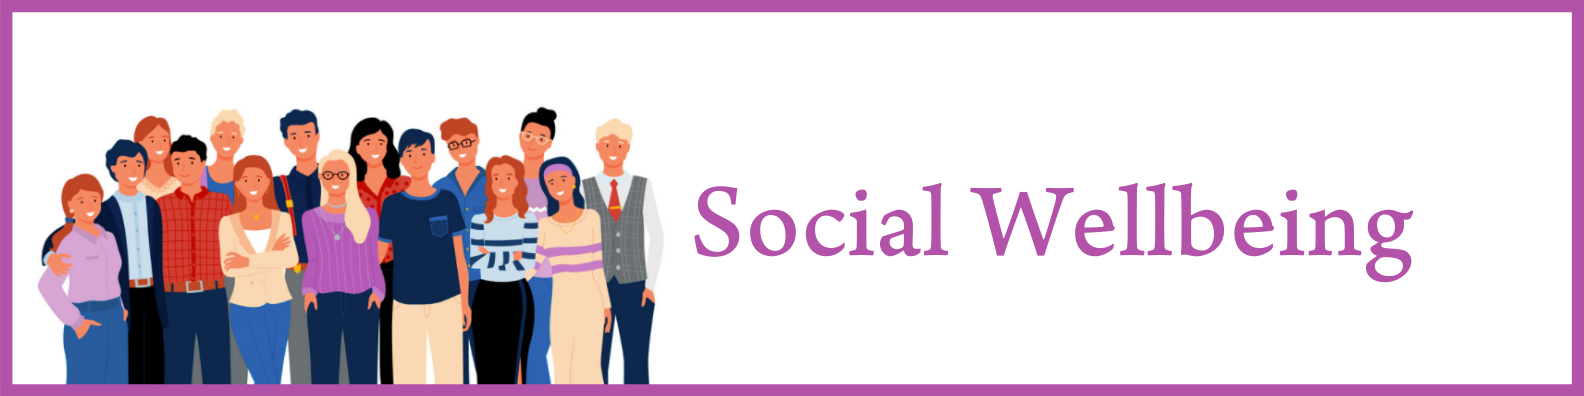 Social Wellbeing Banner